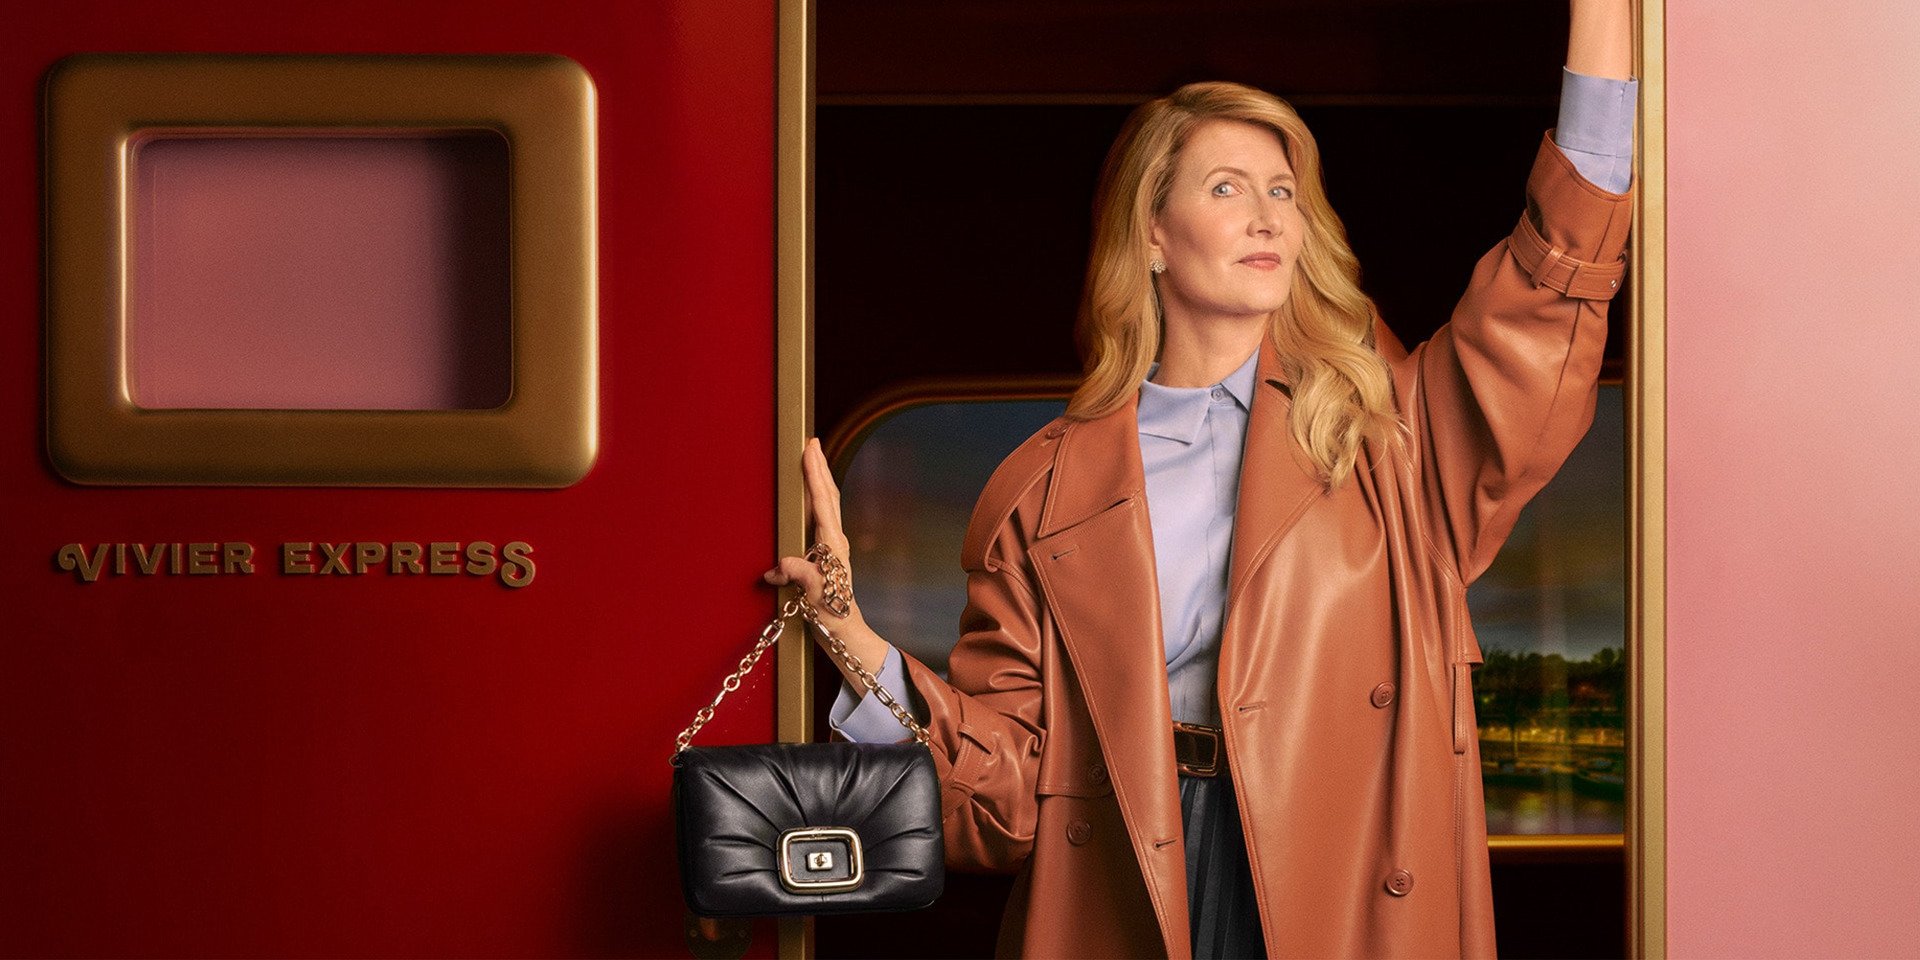 ROGER VIVIER ICONS CAMPAIGN FILM STARRING LAURA DERN